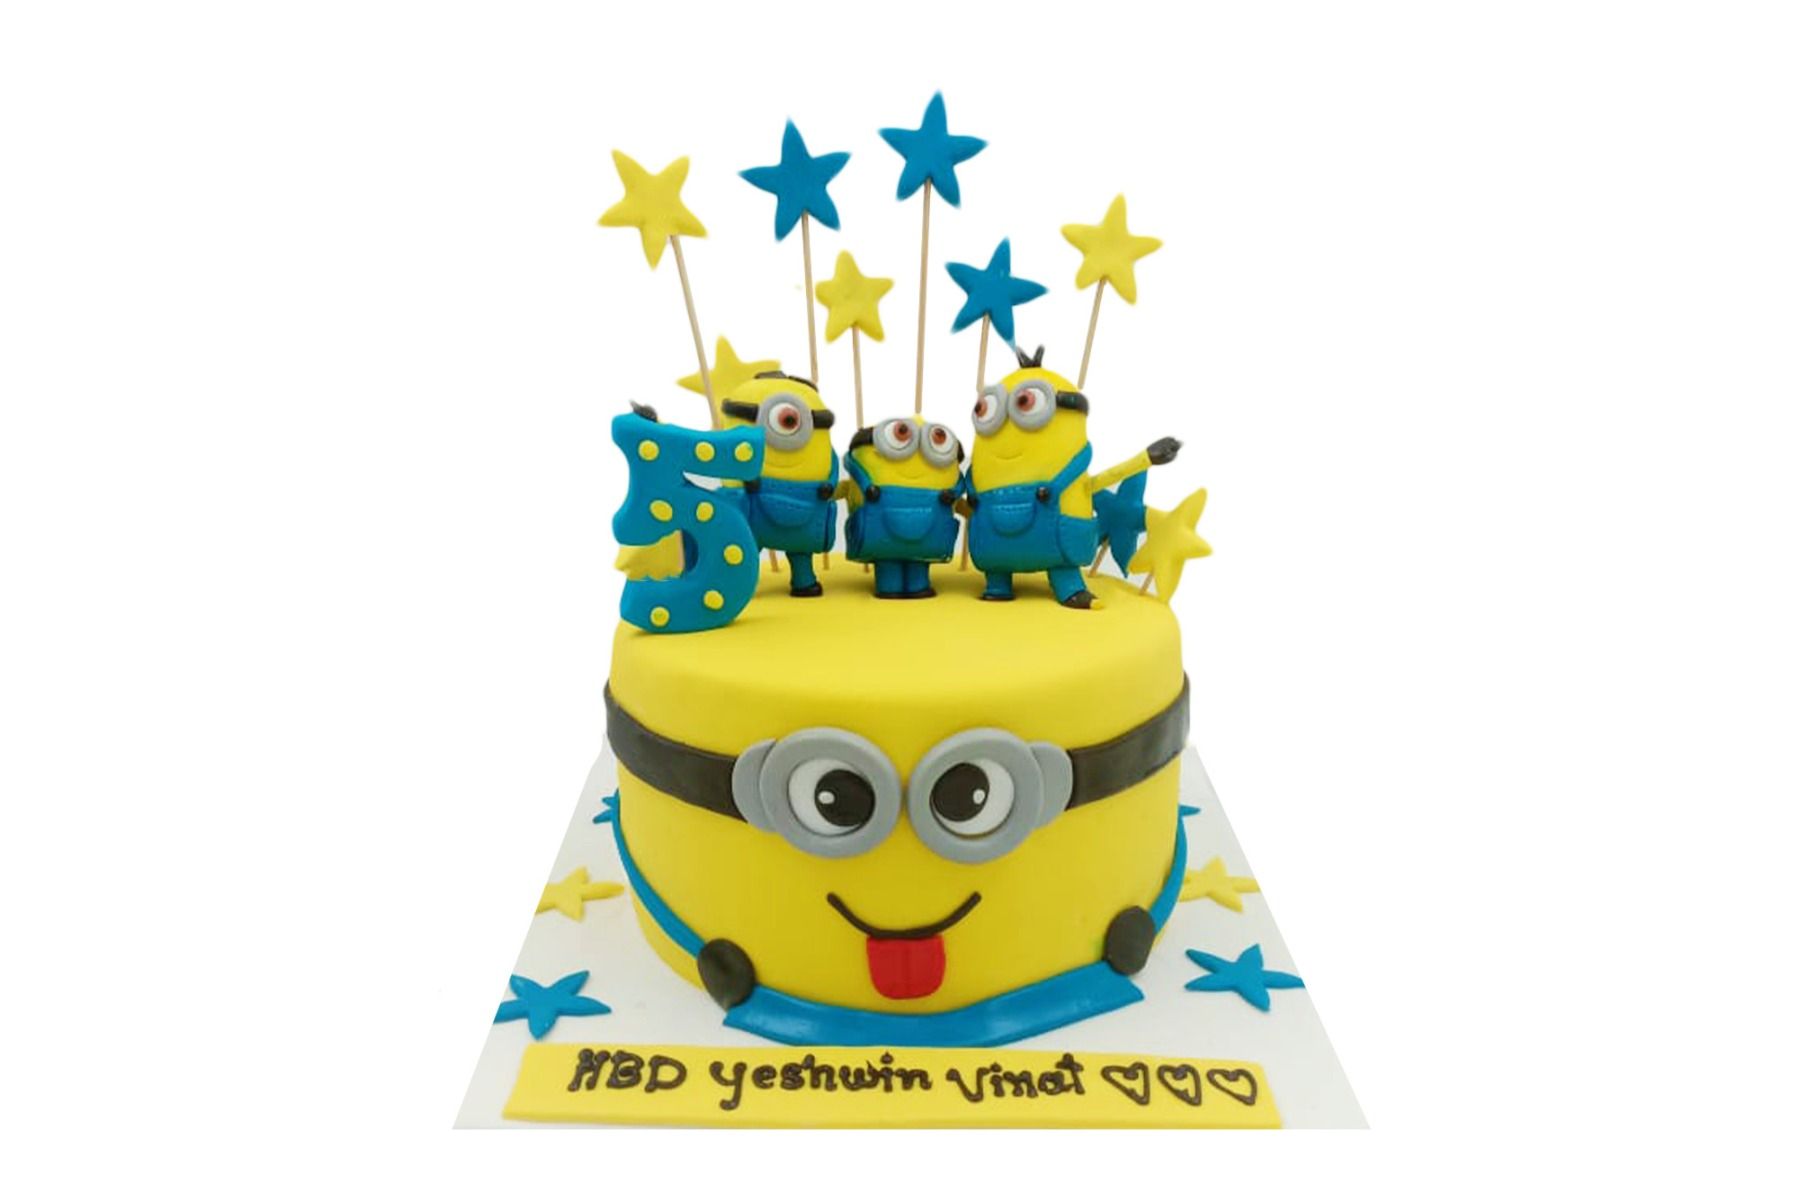 Cute Minion Birthday Cake Delivery in Delhi NCR - ₹7,499.00 Cake Express-thanhphatduhoc.com.vn